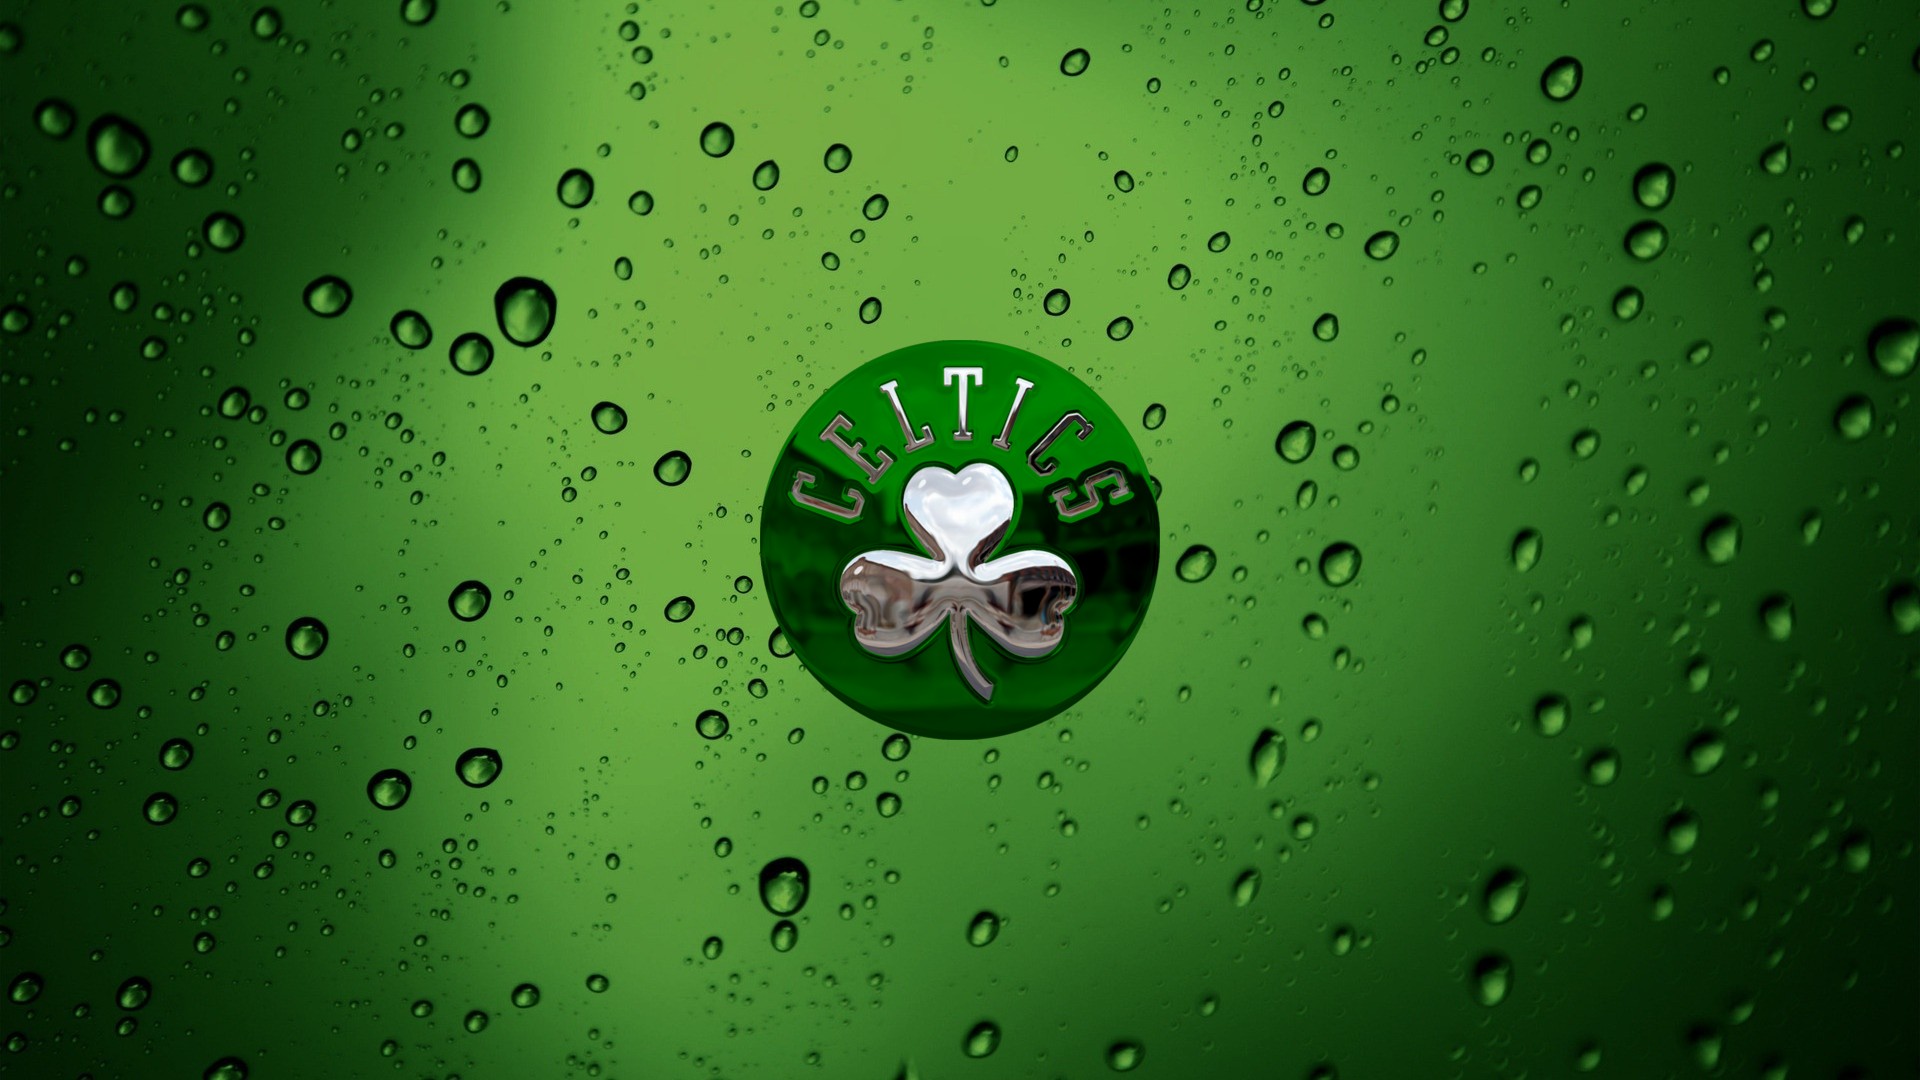 Best Boston Celtics Wallpaper HD With Resolution 1920X1080 pixel. You can make this wallpaper for your Desktop Computer Backgrounds, Mac Wallpapers, Android Lock screen or iPhone Screensavers